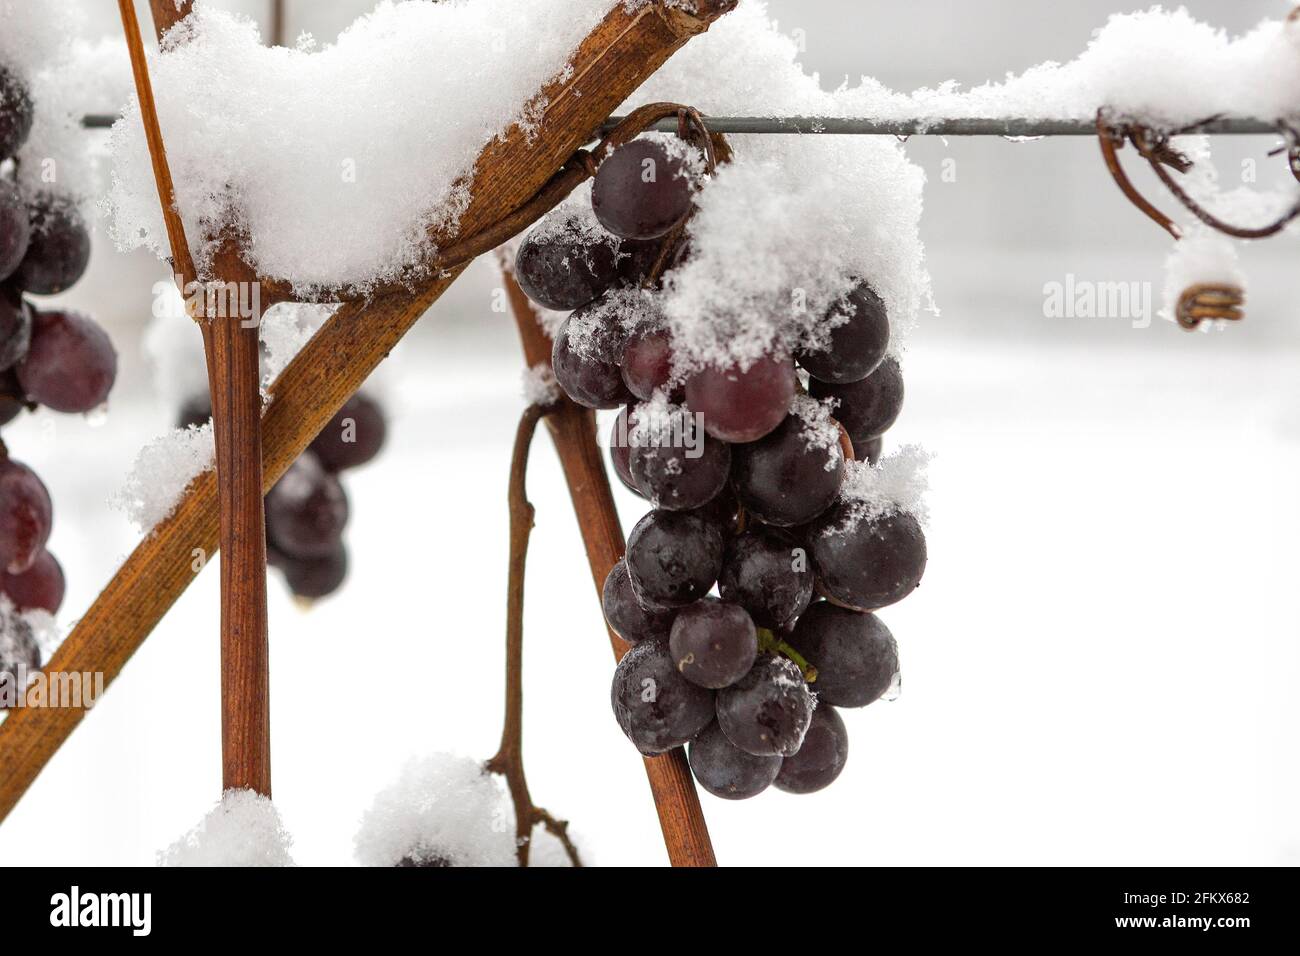 Grapes, Fruits With Snow Stock Photo